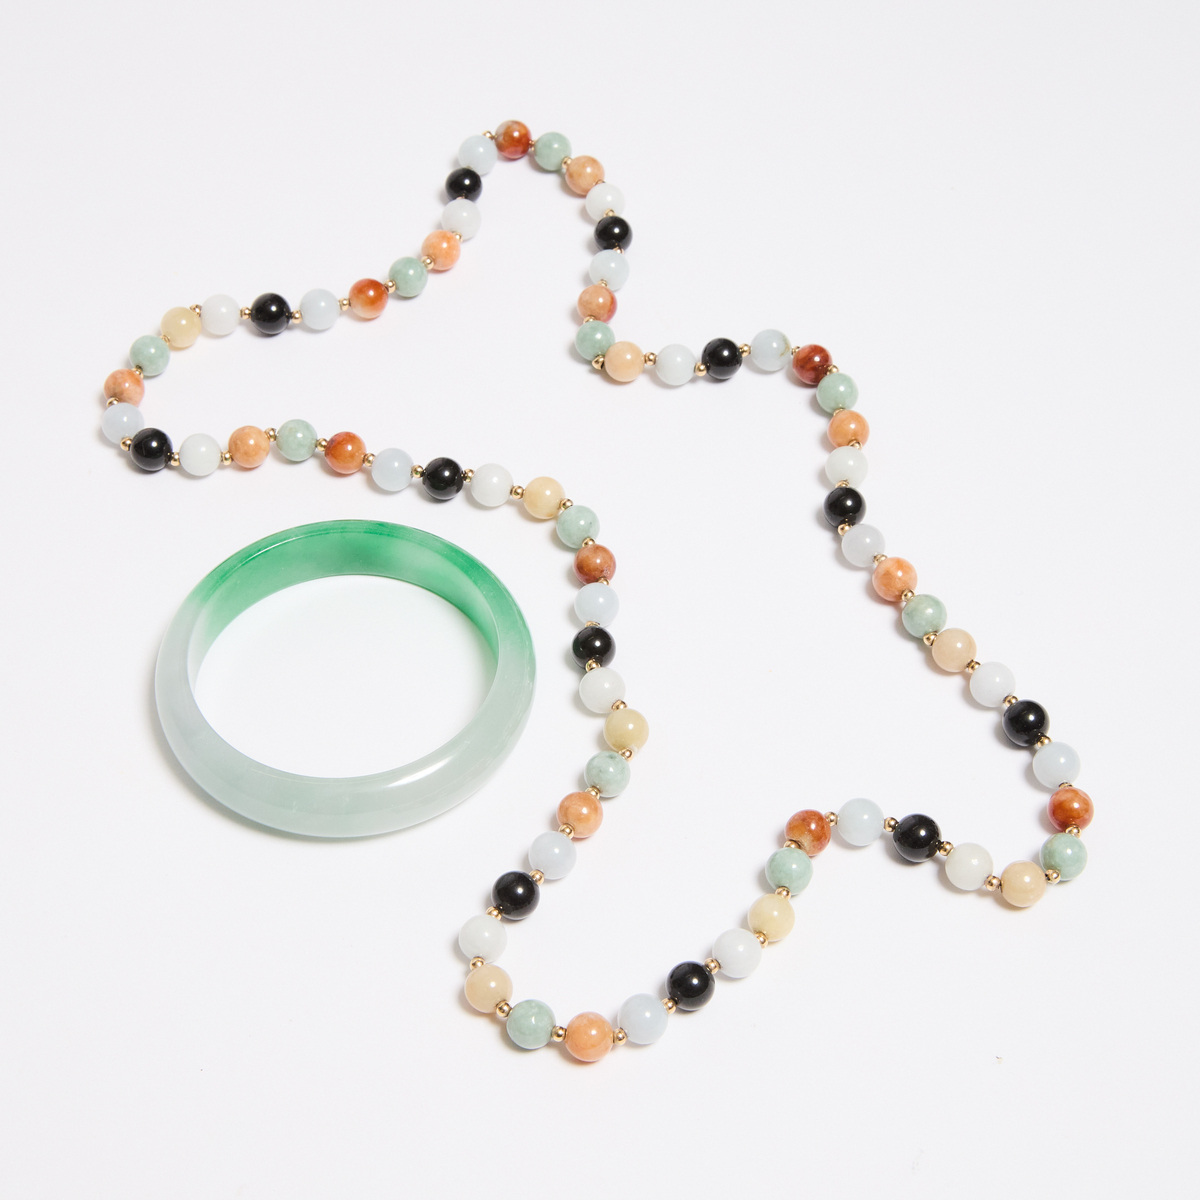 A Multicoloured Jadeite Bead Necklace With 14k Yellow Gold Spacers, Together With a Jadeite Bangle, - Image 2 of 2